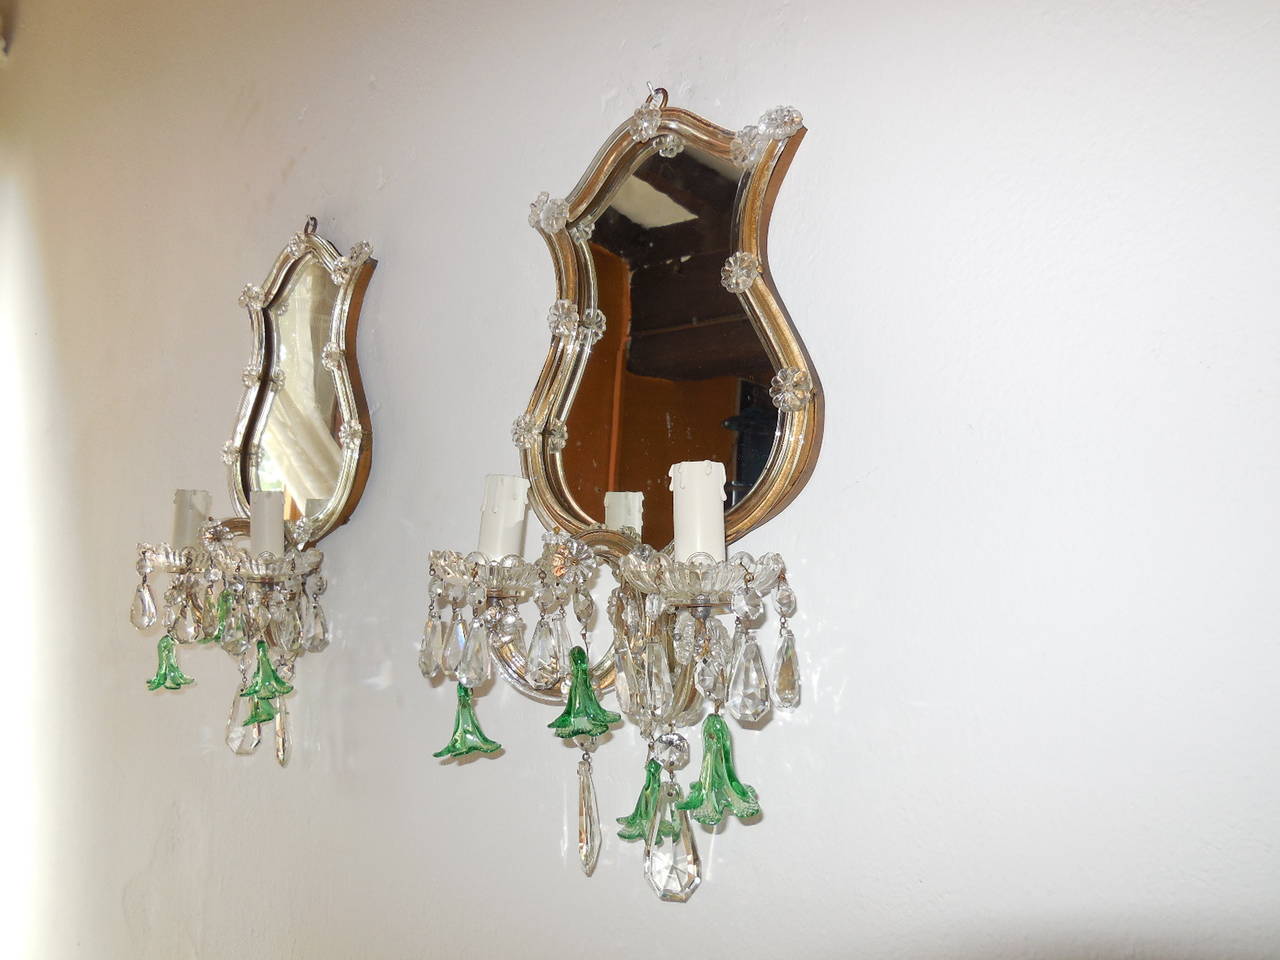 Housing 2 lights each, sitting in crystal bobeches.  Crystal prisms and Murano green bell flowers.  Gilt metal with clear Murano glass covering.  Mirrors have a bit of silver missing.  Re-wired for US and ready to hang.  Free shipping from Italy.